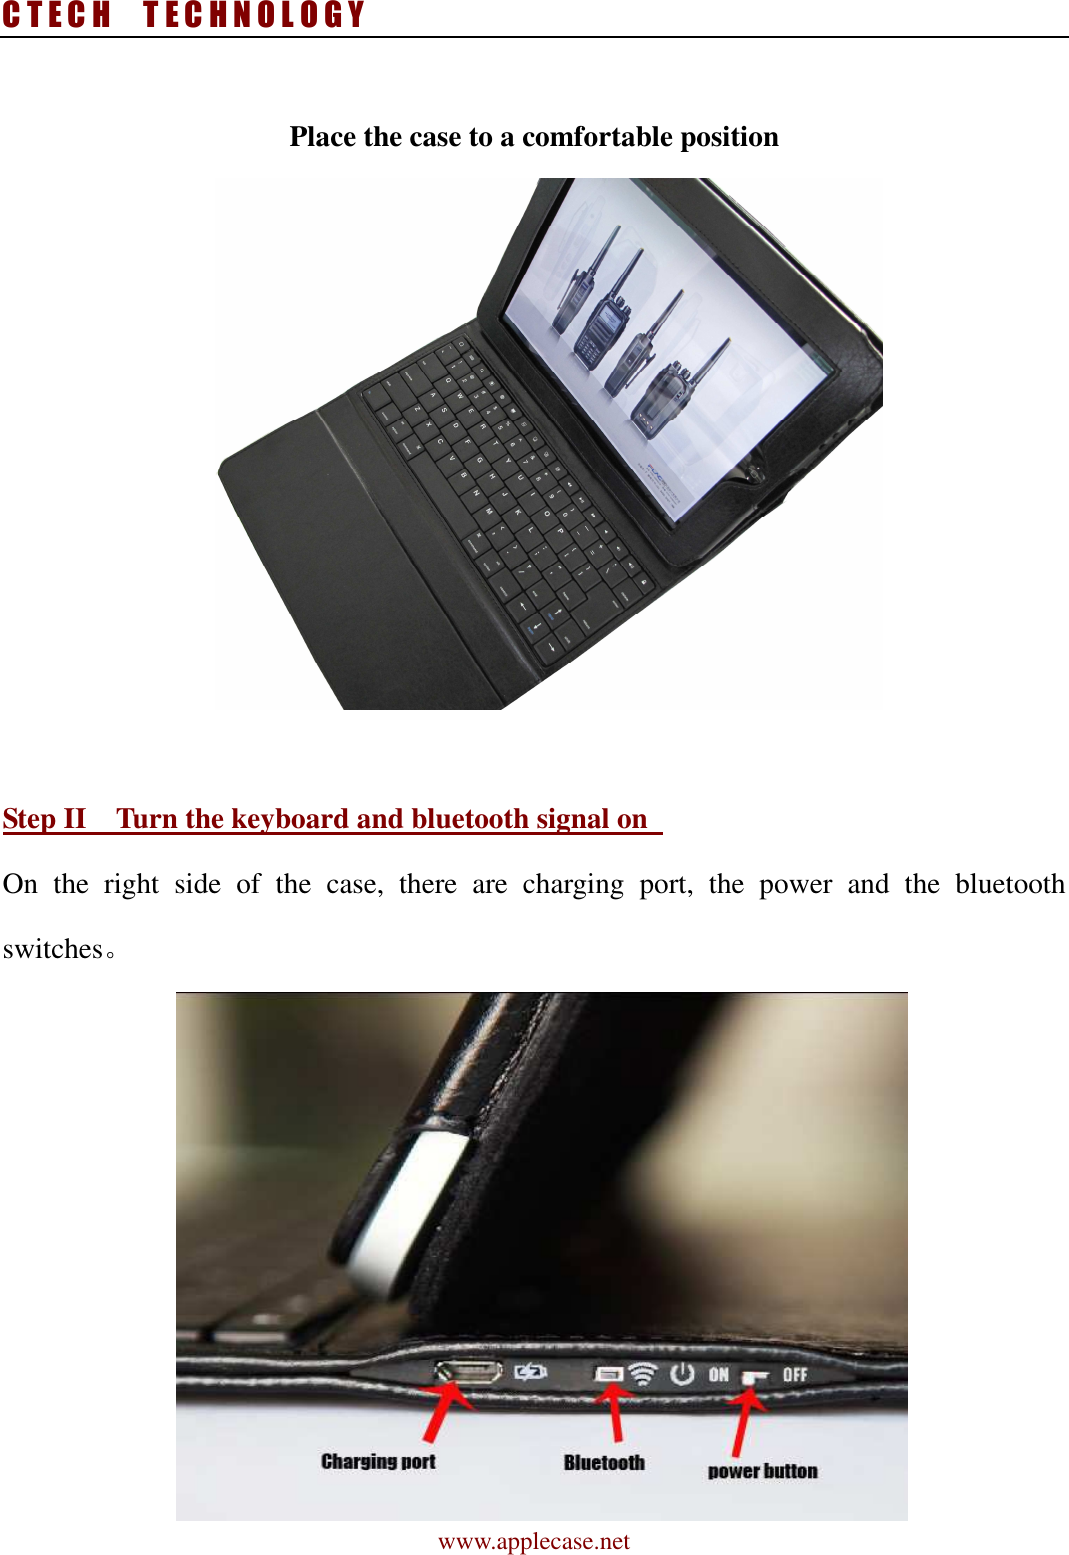 C T E C H    T E C H N O L O G Y www.applecase.net  Place the case to a comfortable position       Step II    Turn the keyboard and bluetooth signal on   On  the  right  side  of  the  case,  there  are  charging  port,  the  power  and  the  bluetooth switches。   